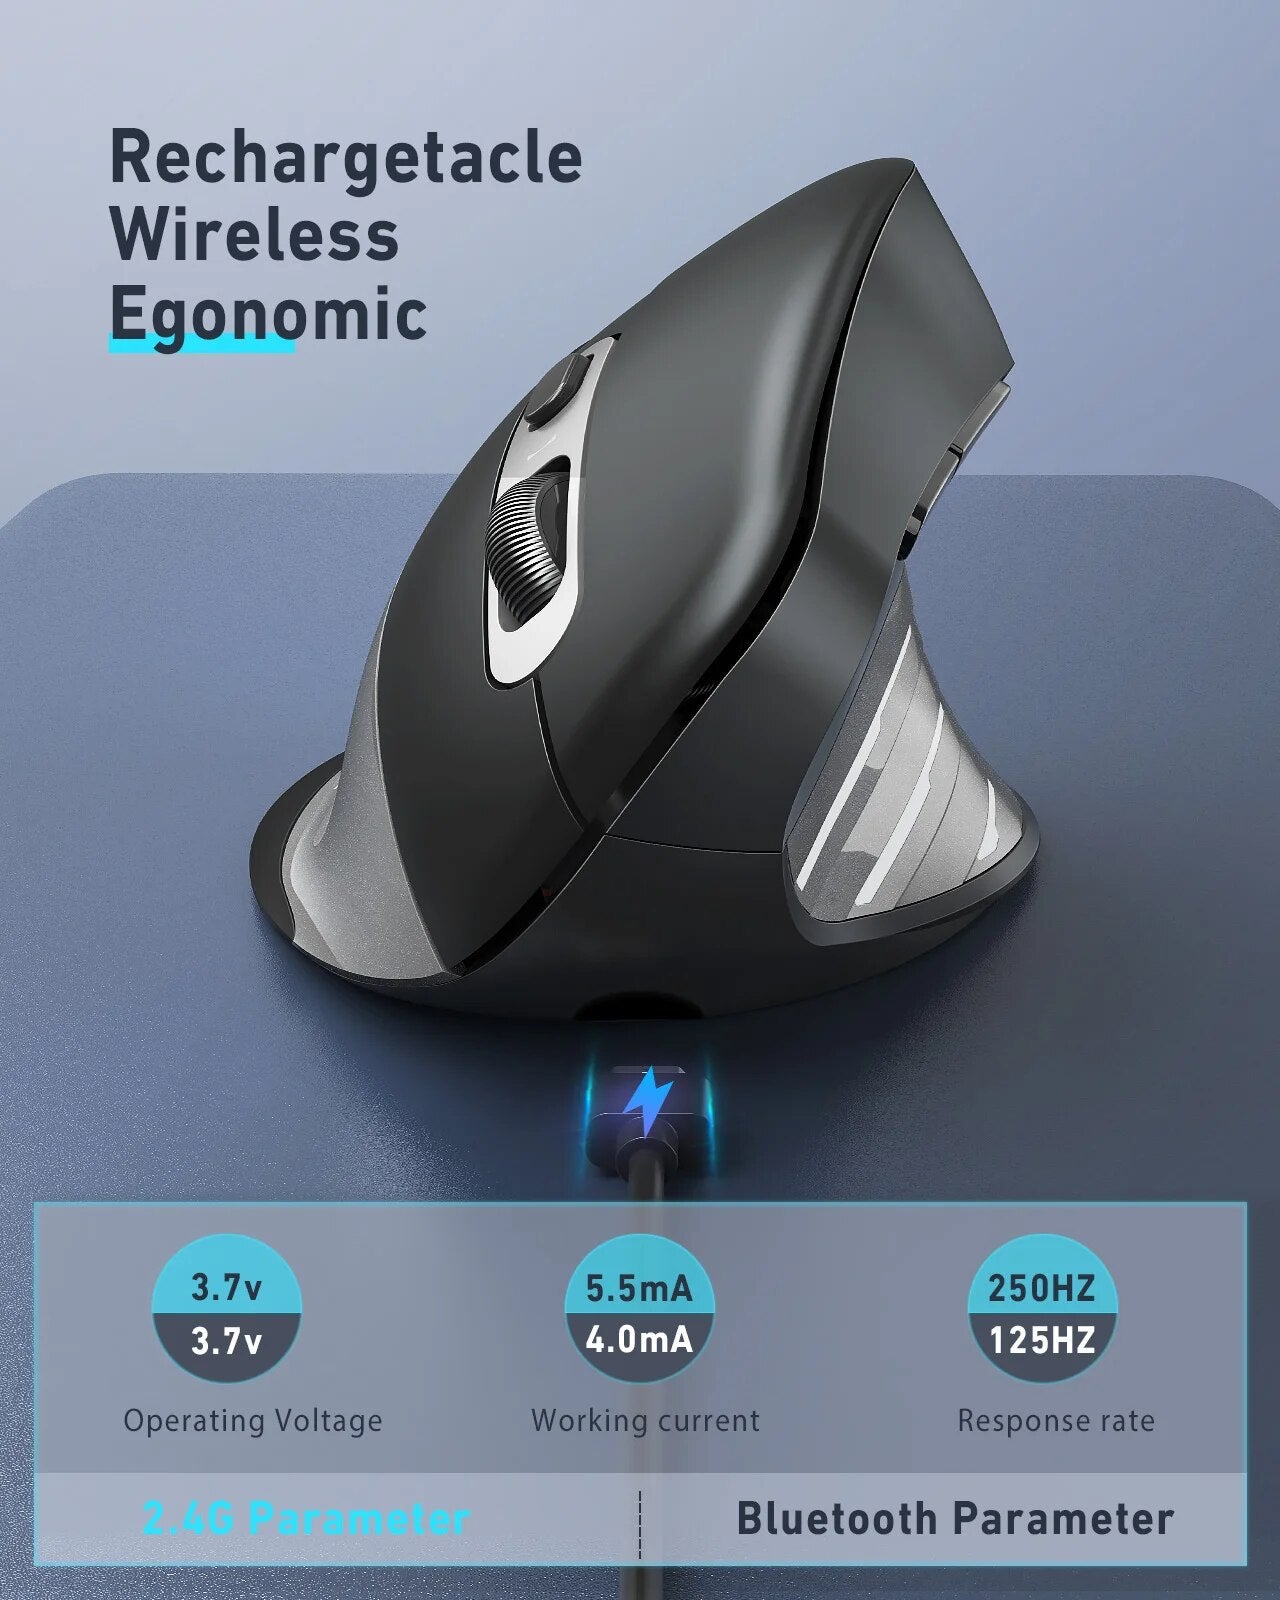 M056 Bluetooth Wireless Vertical Mouse